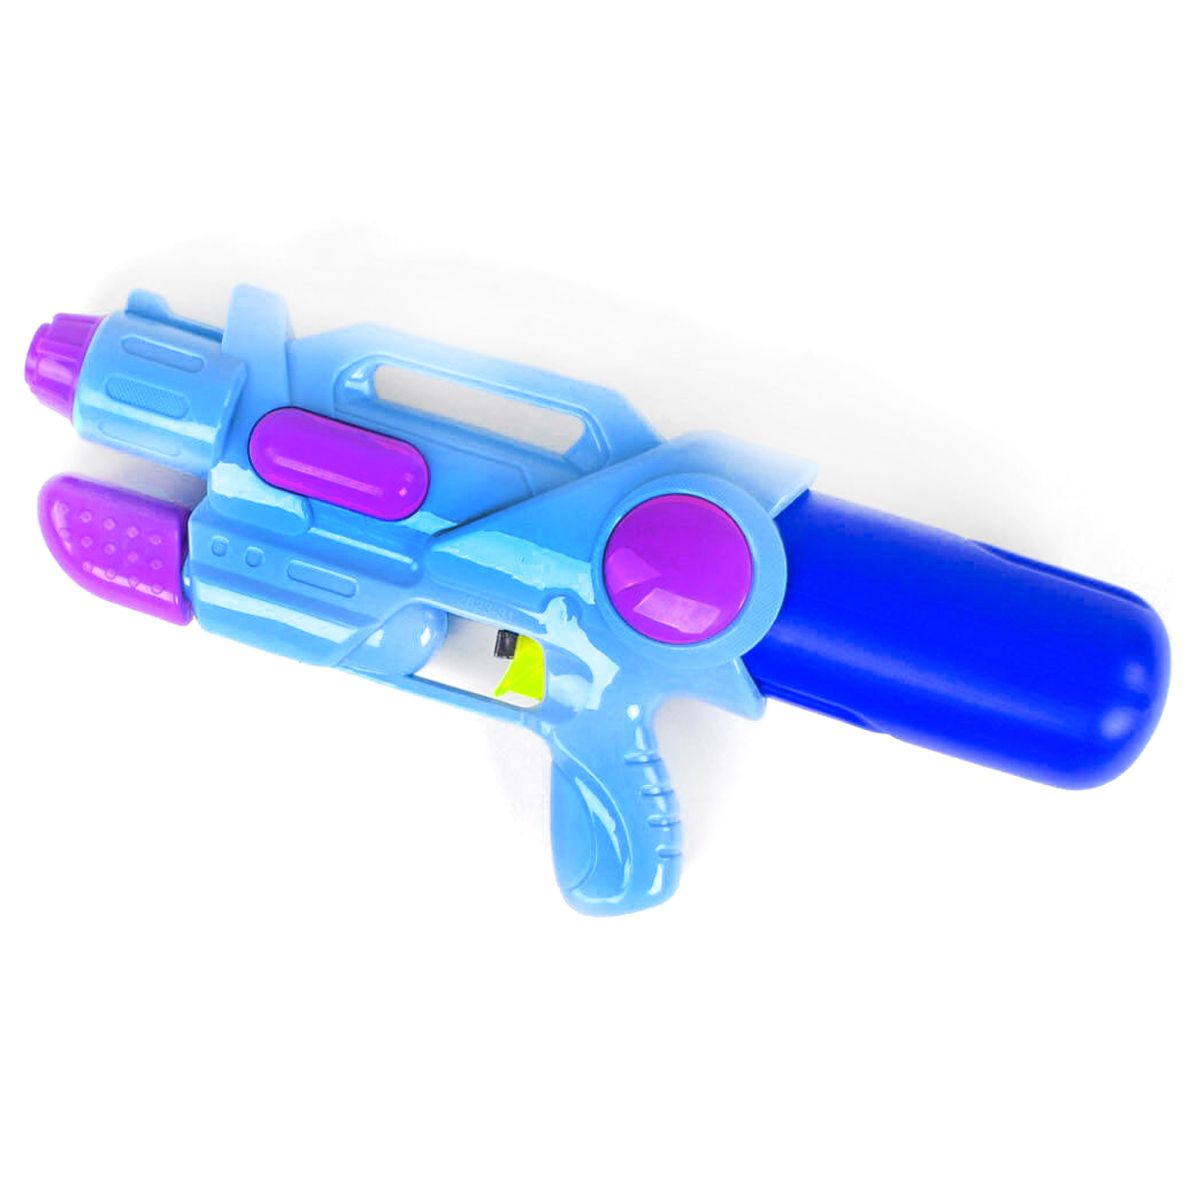 Go fish candy squirt fun water shooter